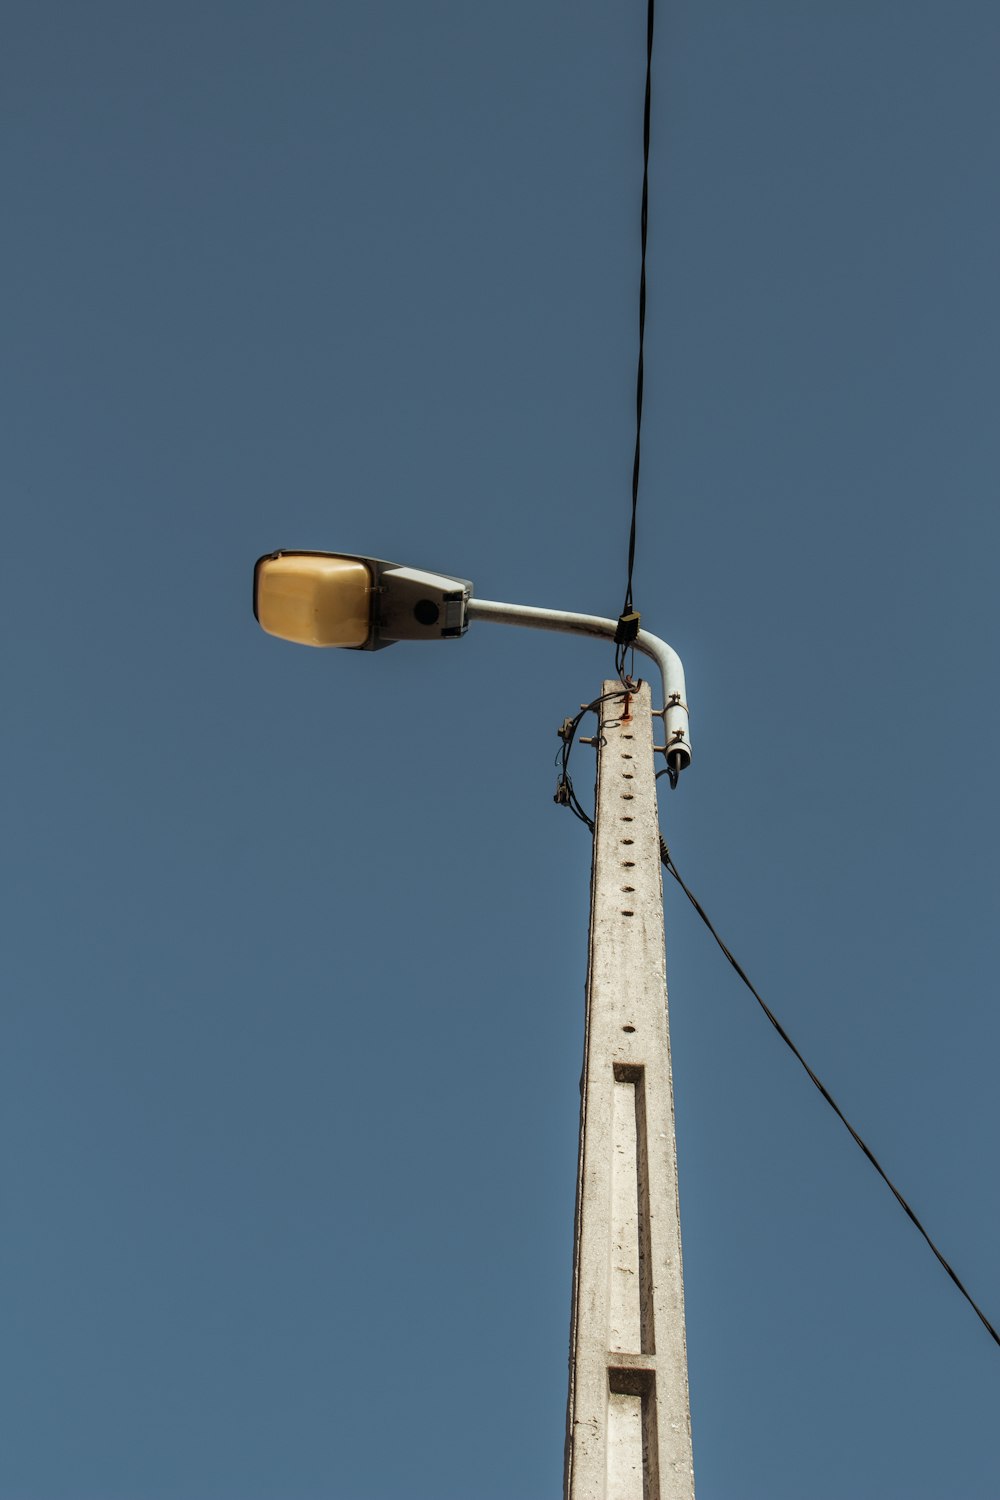 brown and white street light under blue sky during daytime